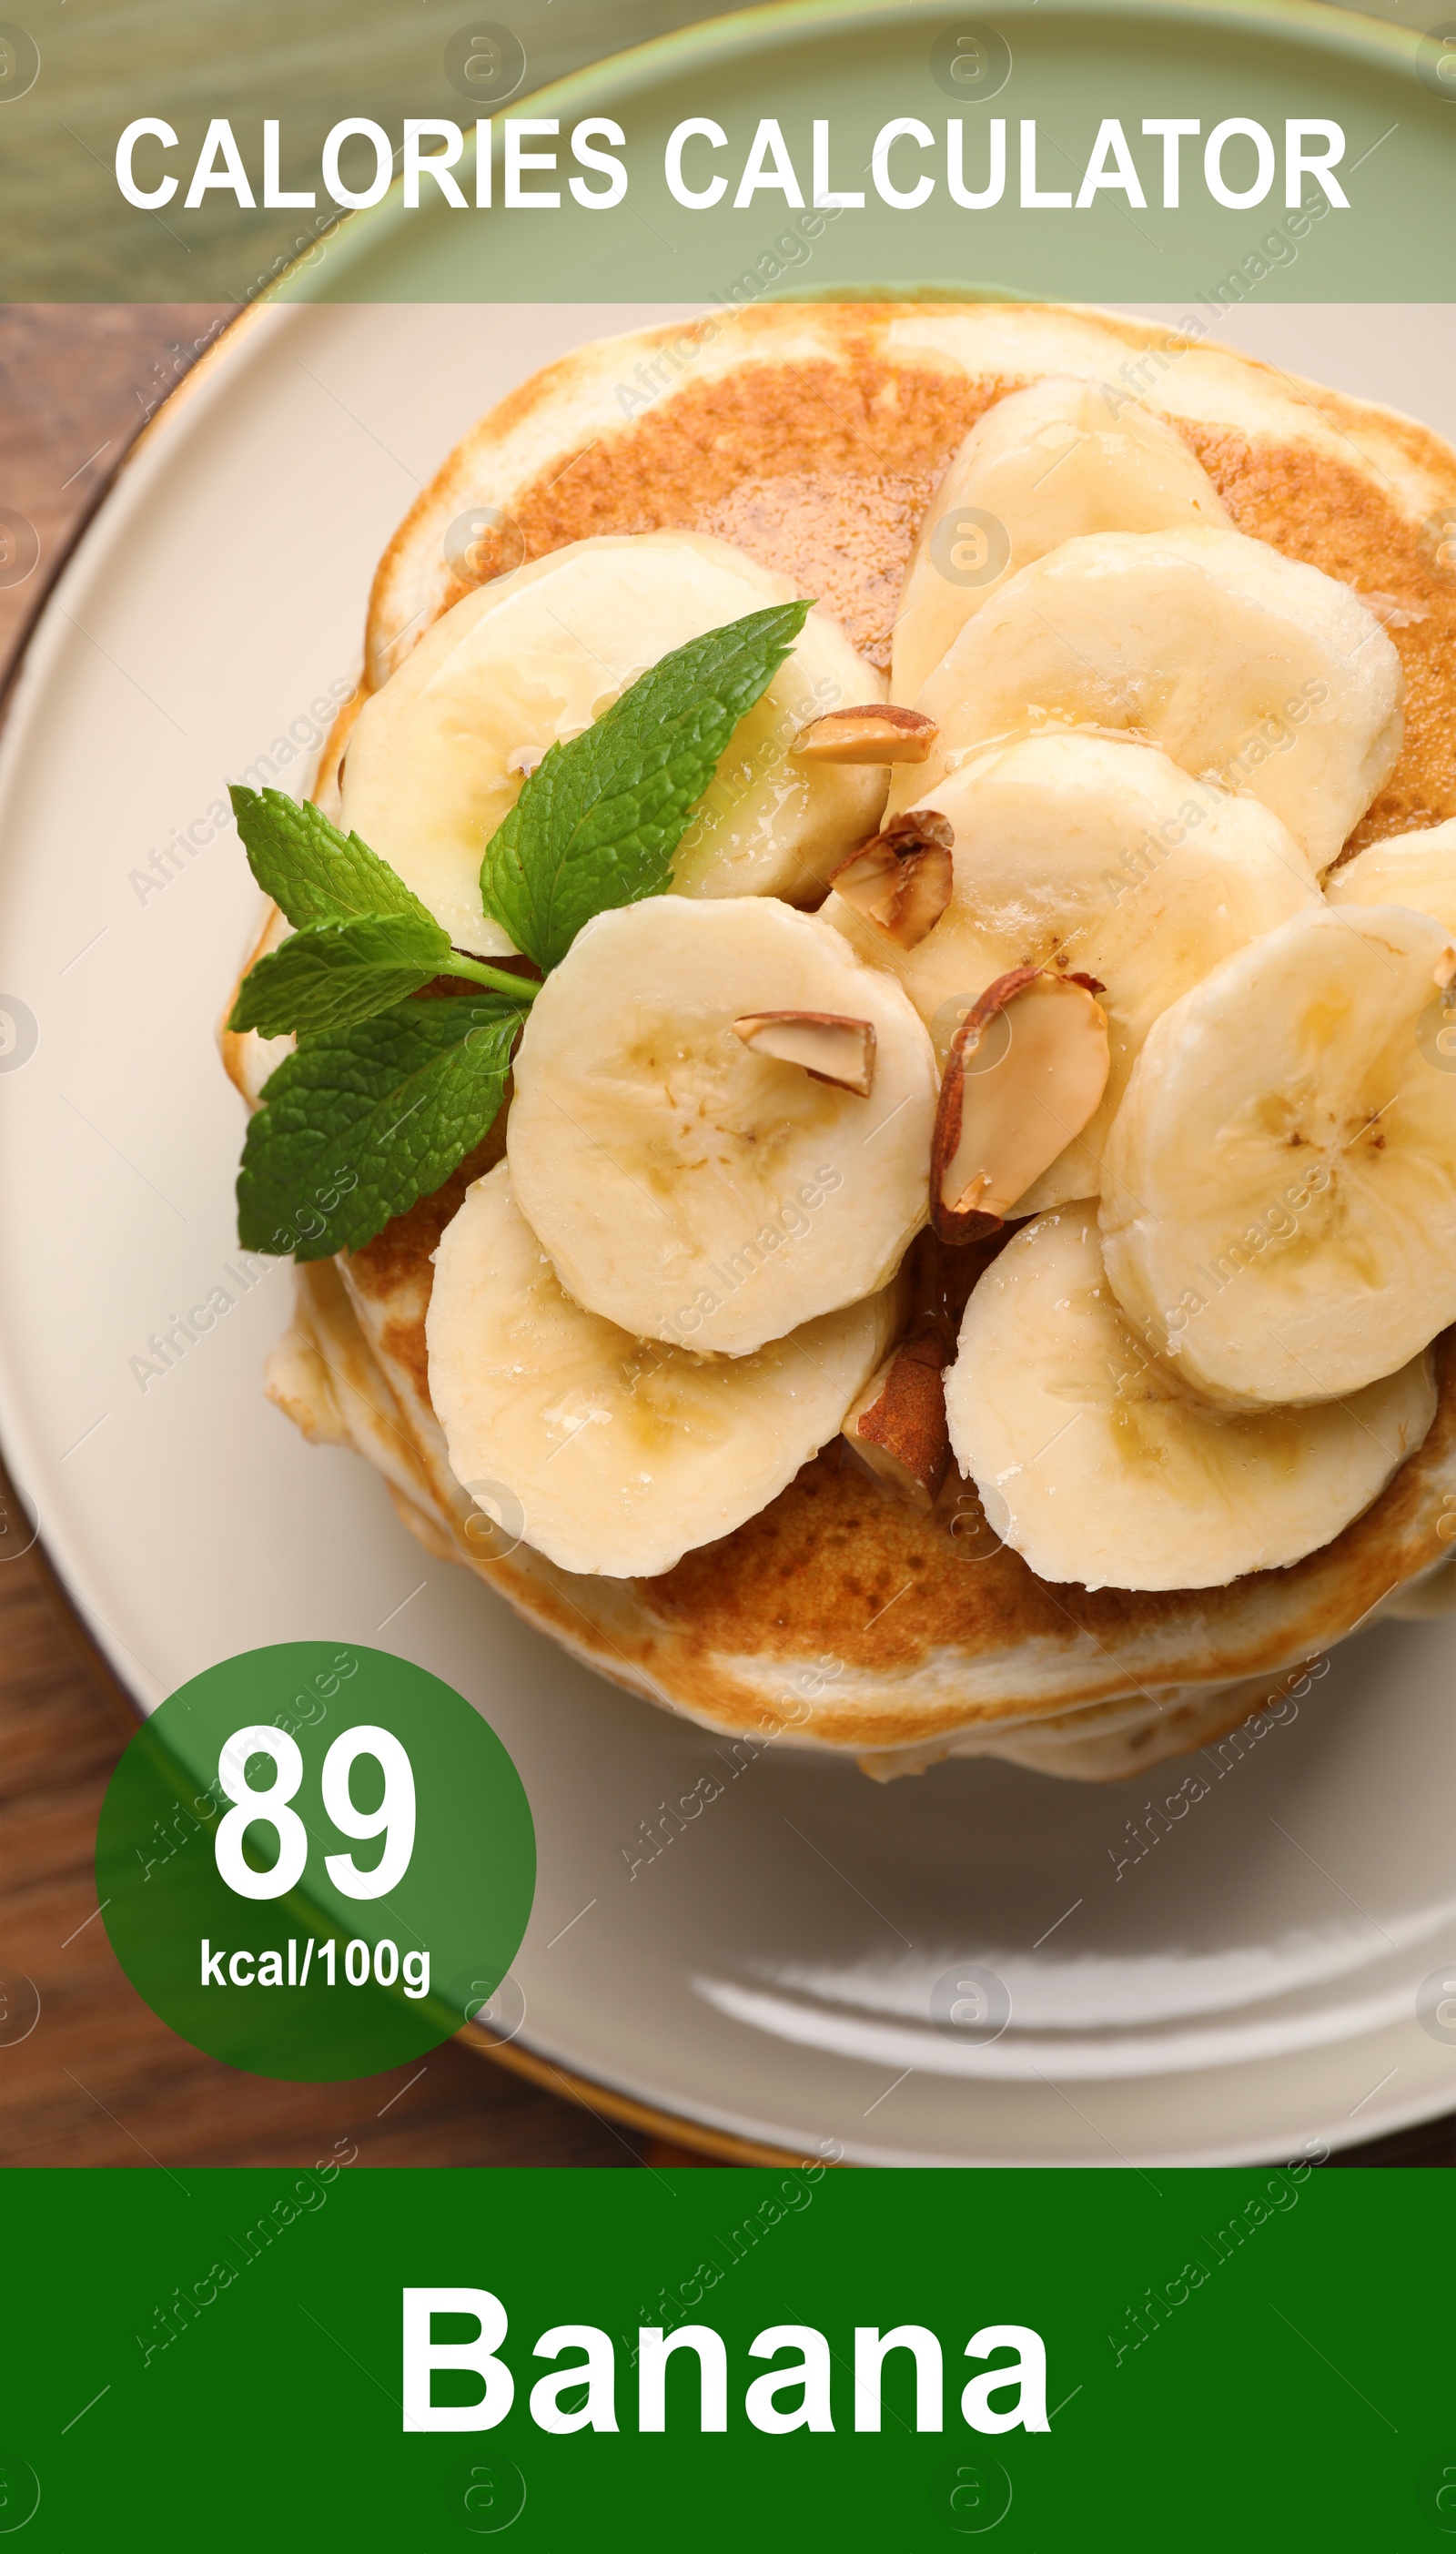 Image of Weight loss concept. Calories calculator app with image of tasty pancakes with banana and its caloric content